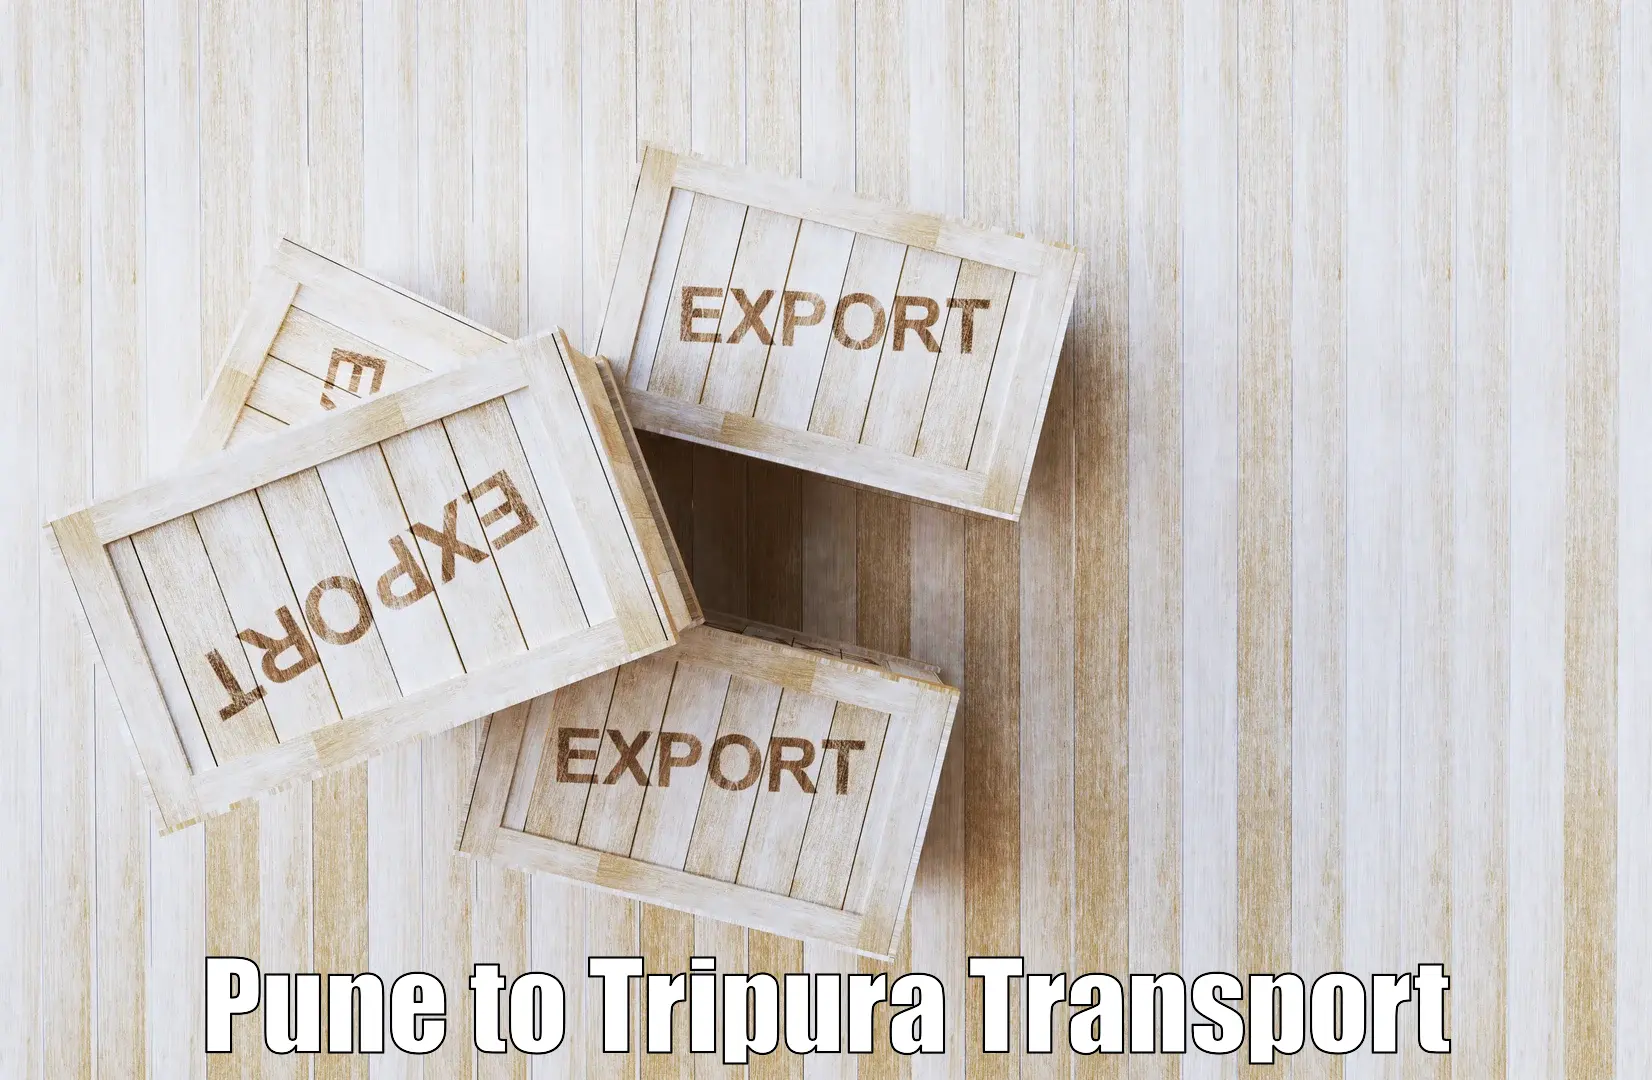 Express transport services Pune to Udaipur Tripura